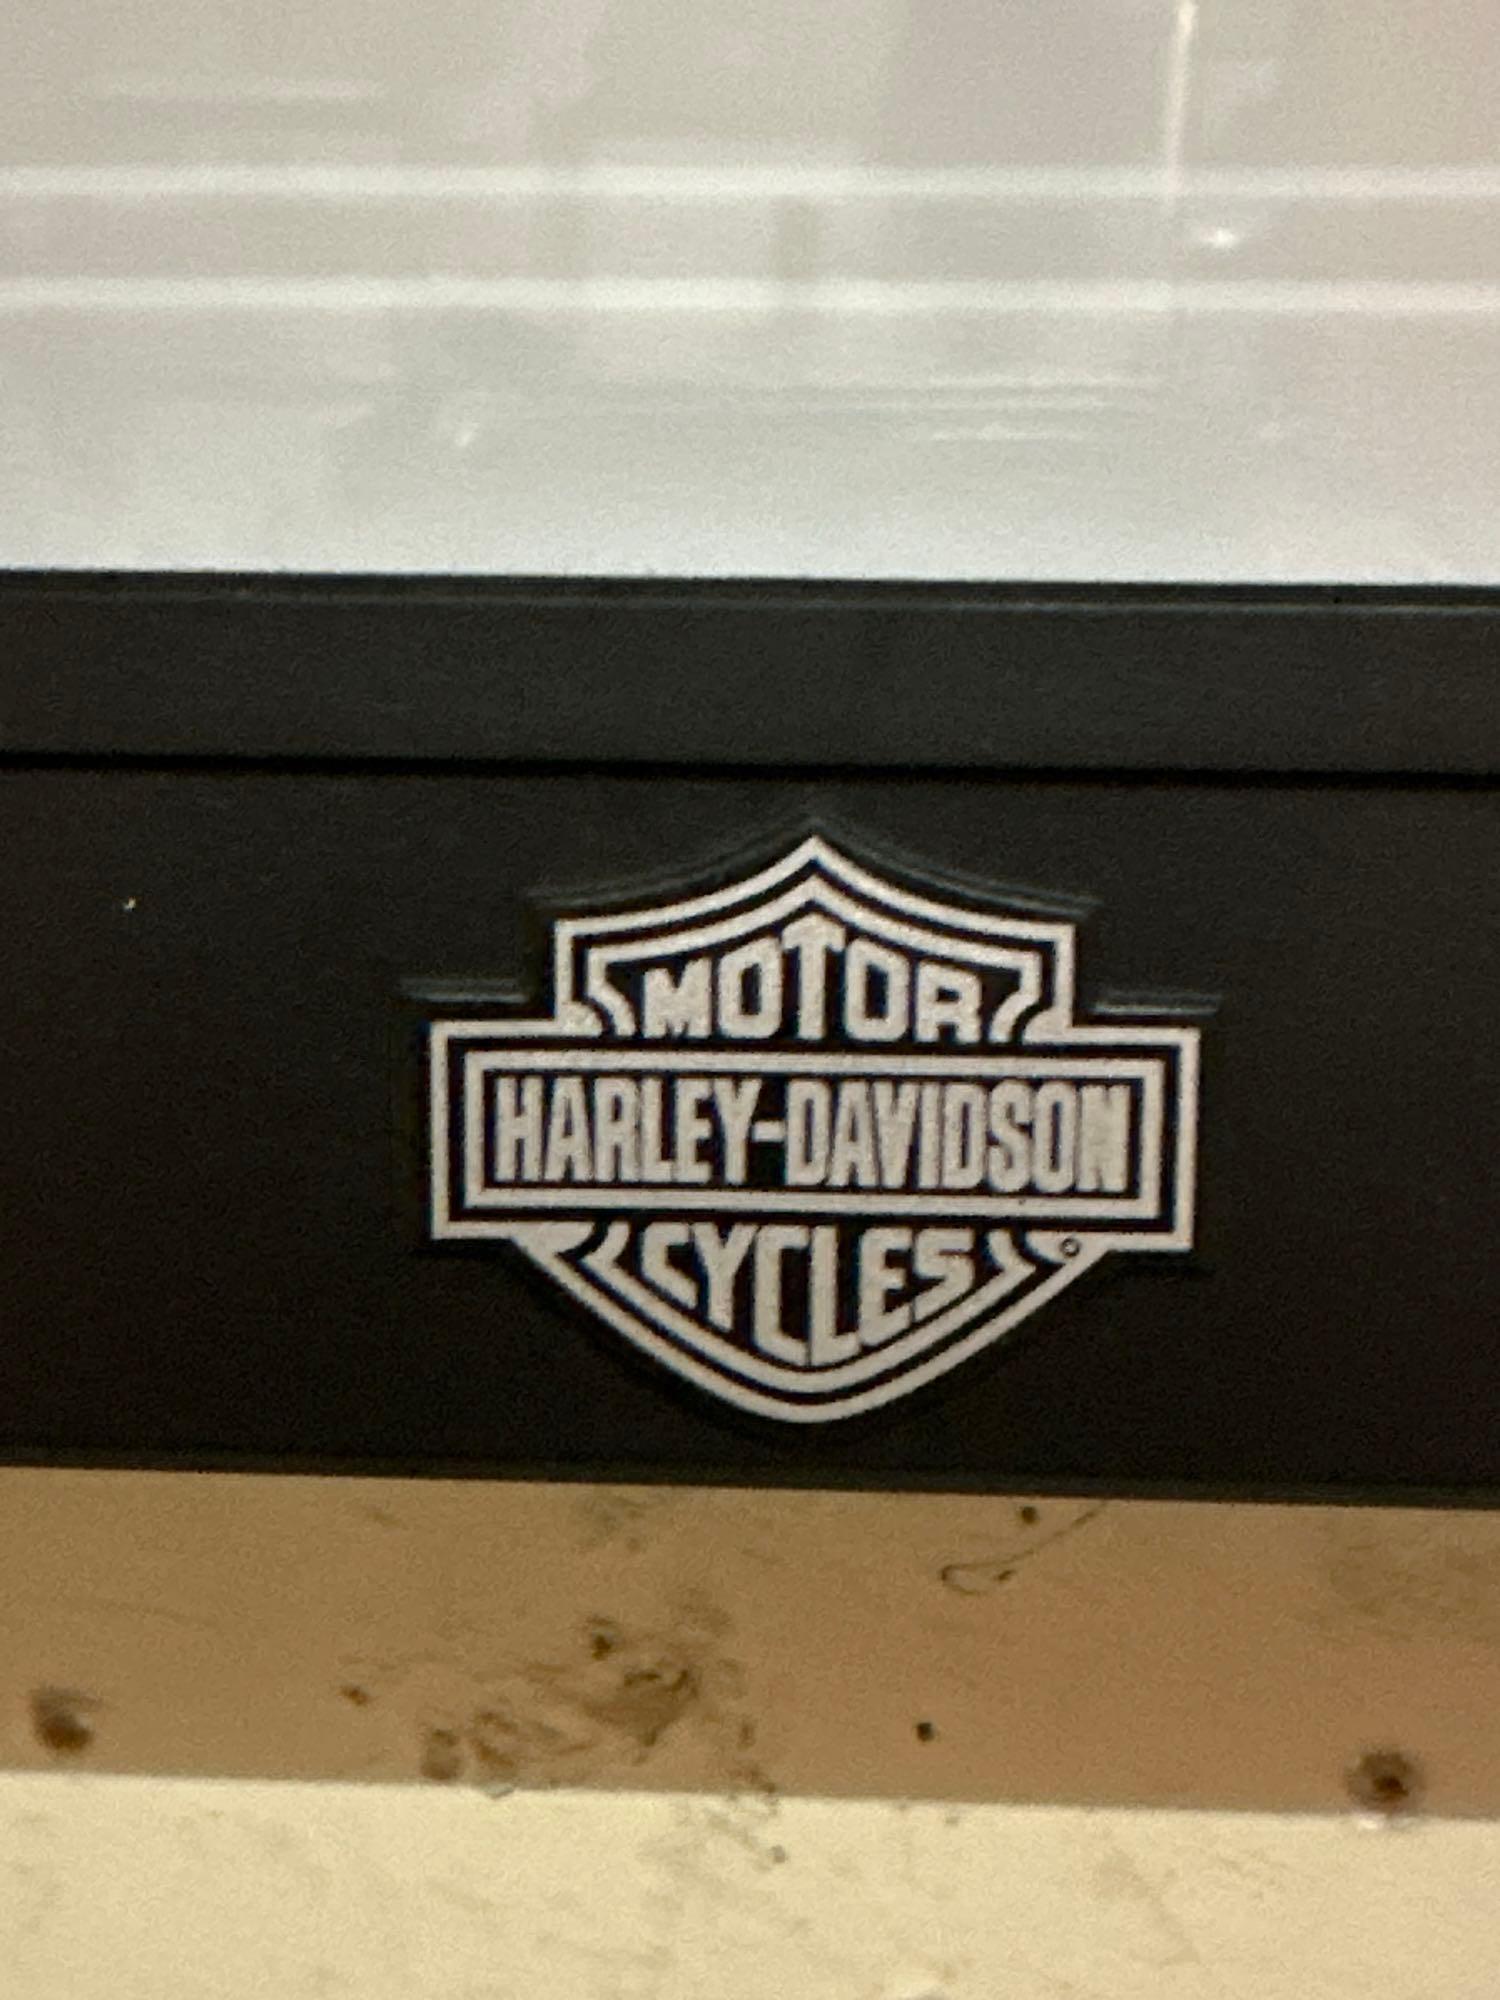 Harley Davidson Miniature Tank Collection in Display case